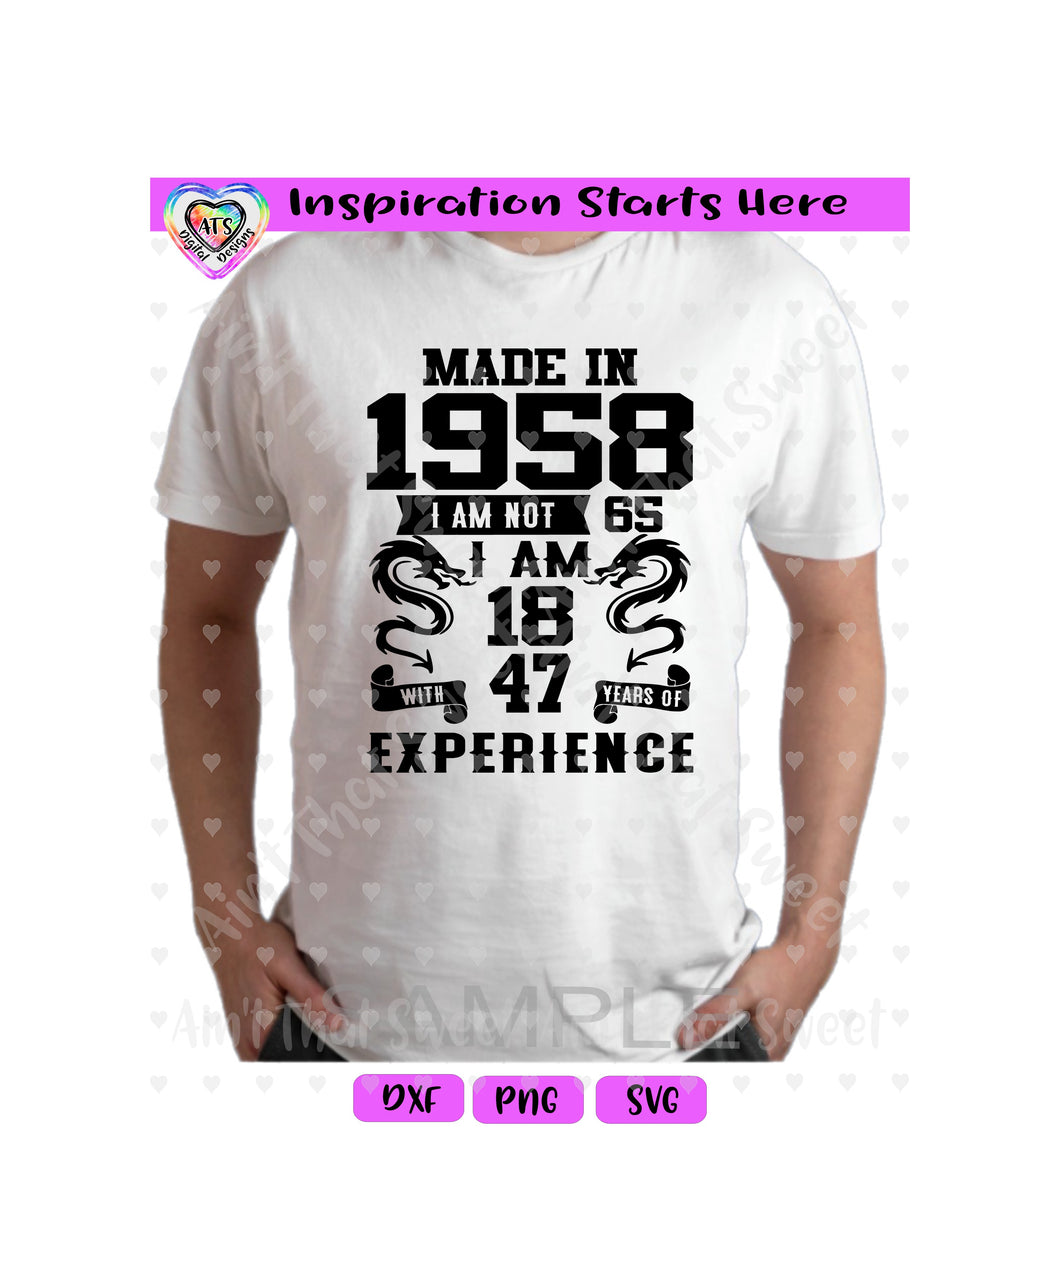 Made In 1958 | I Am Not 65 | I'm 18 With 47 Years Experience (Based on 2023) - Transparent PNG SVG DXF - Silhouette, Cricut, ScanNCut